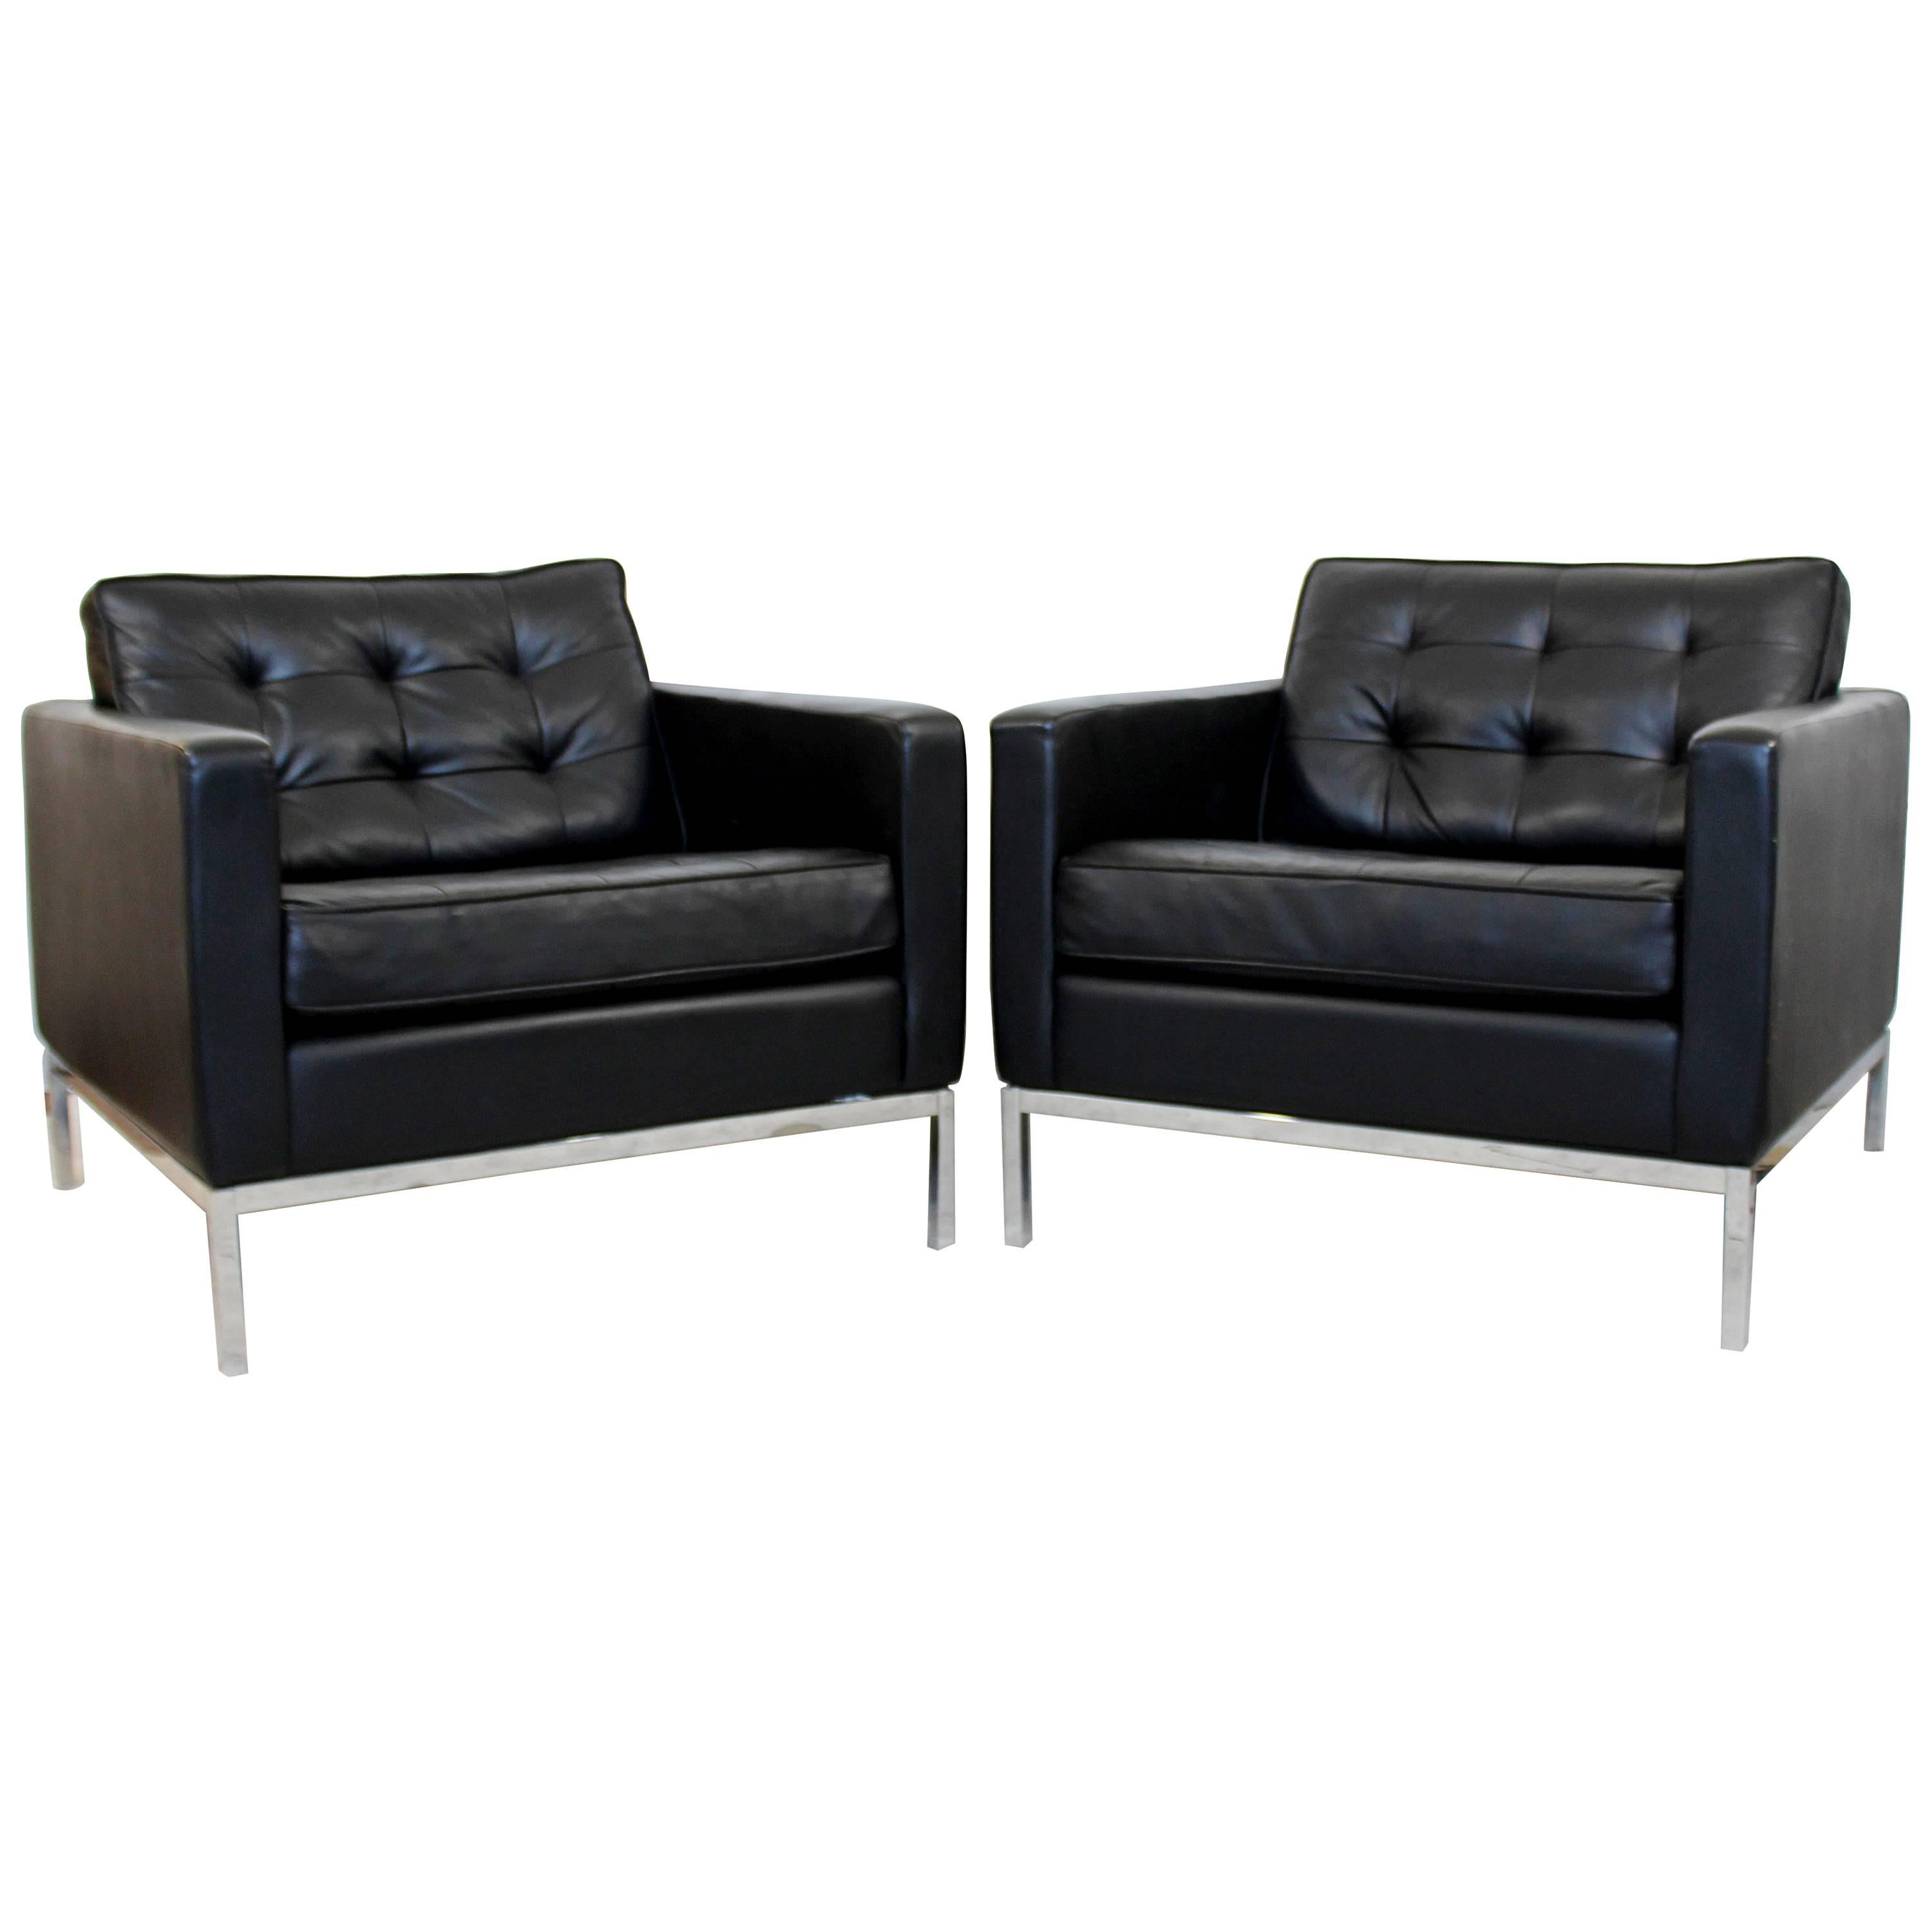 Mid-Century Modern Pair of Knoll Black Leather Chrome Tufted Cube Lounge Chairs